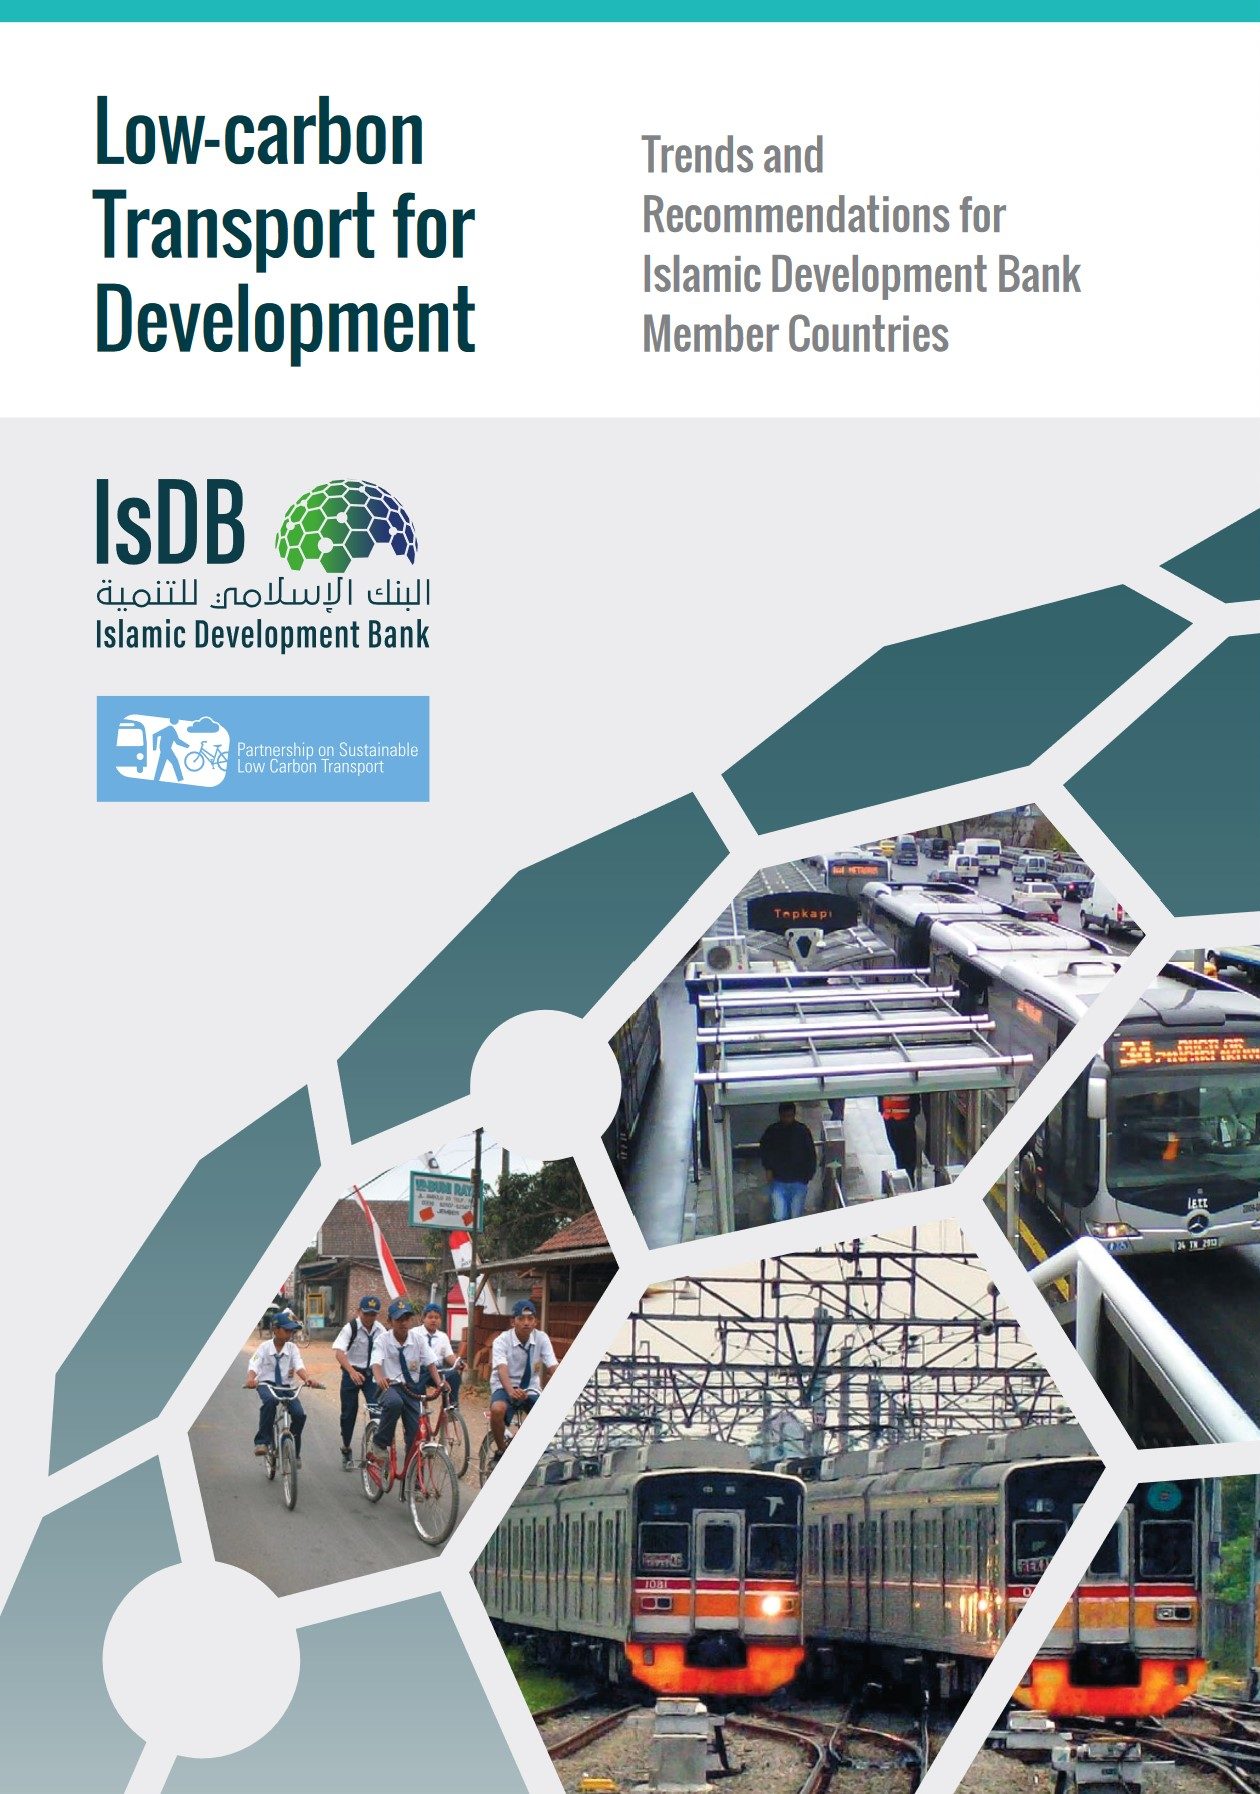 Low-carbon Transport for Development - Trends and Recommendations for Islamic Development Bank Member Countries